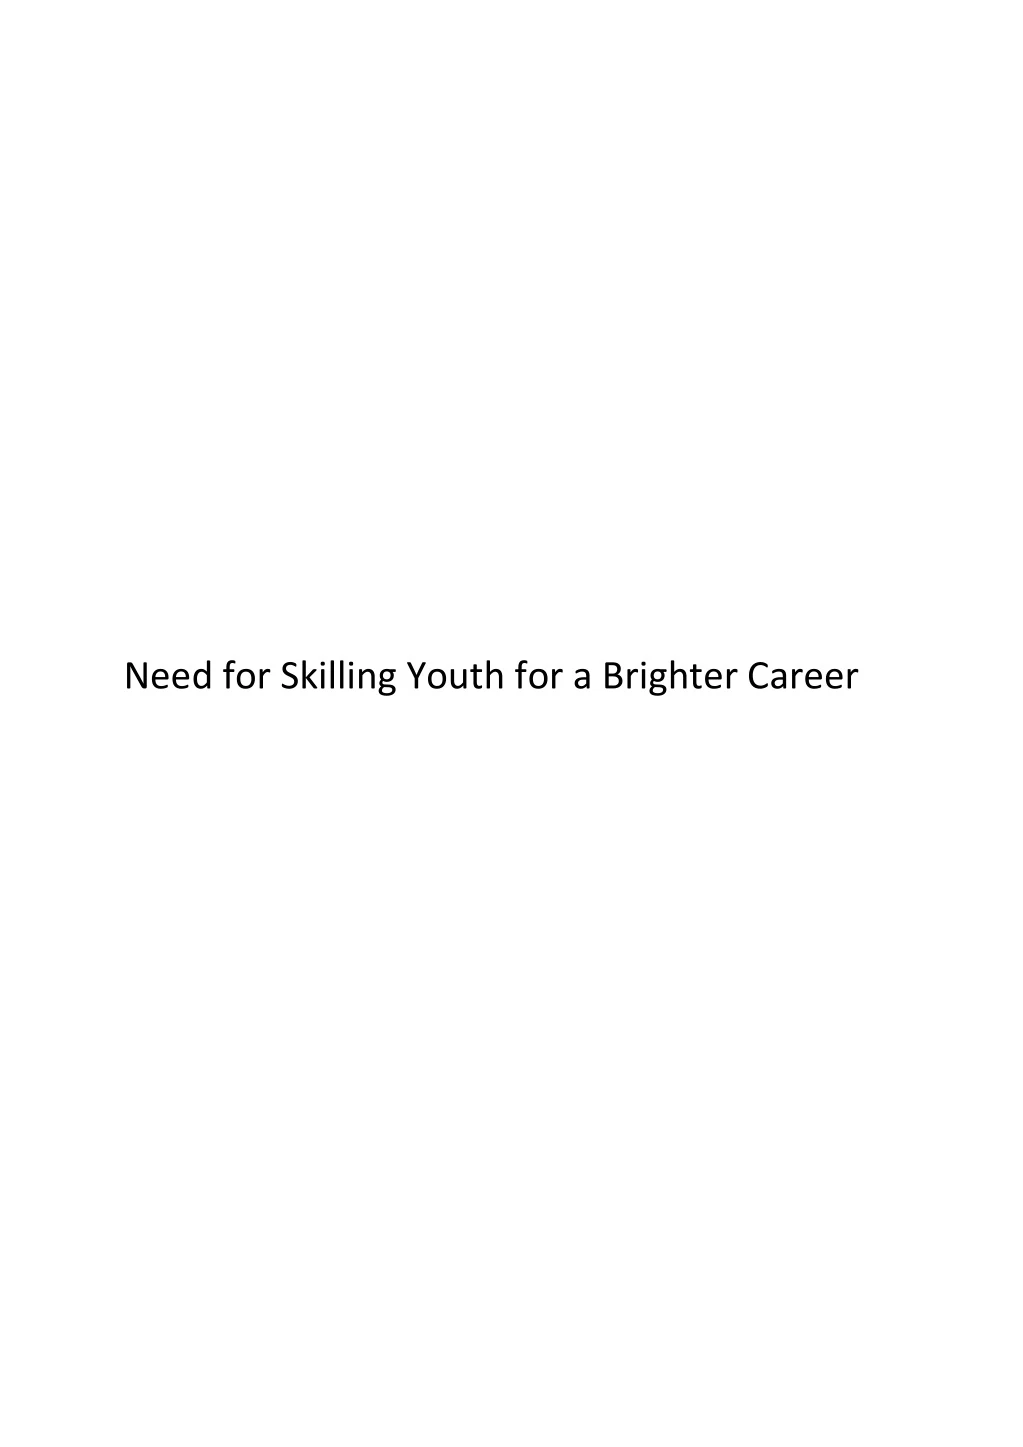 need for skilling youth for a brighter career